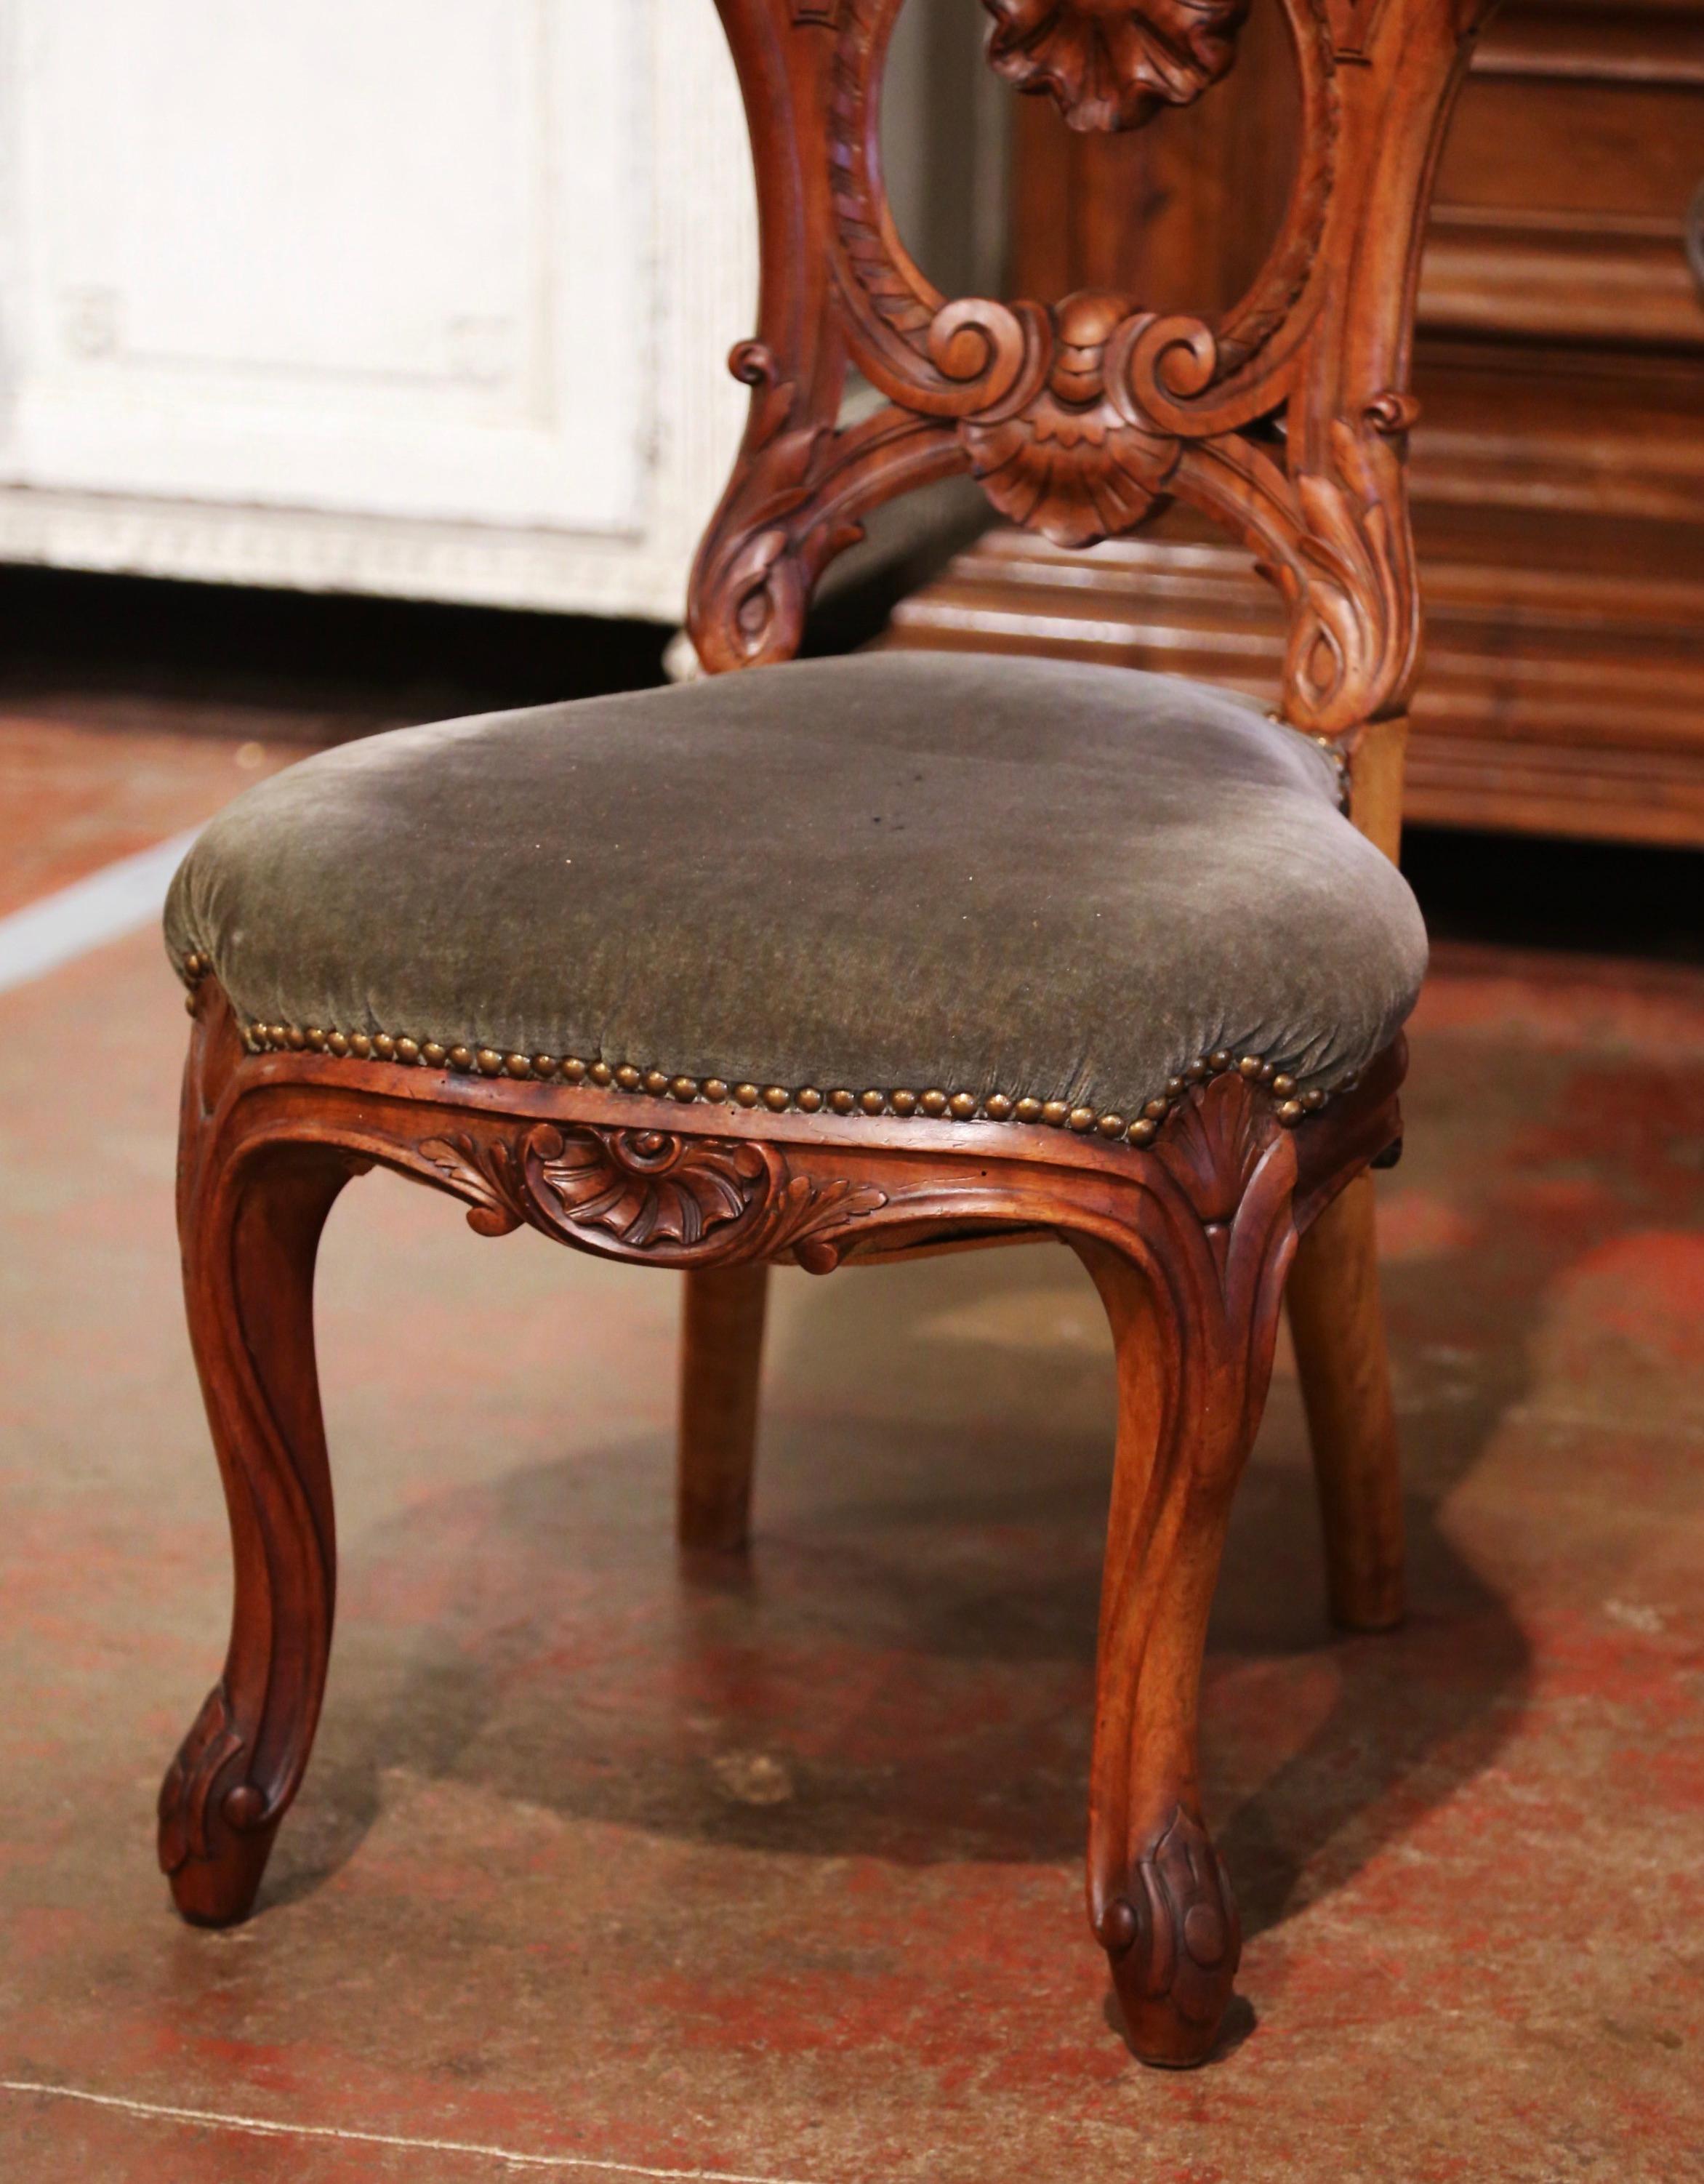 Hand-Carved Mid-19th Century French Carved Walnut Prayer Bench or Prie-Dieu with Velvet For Sale